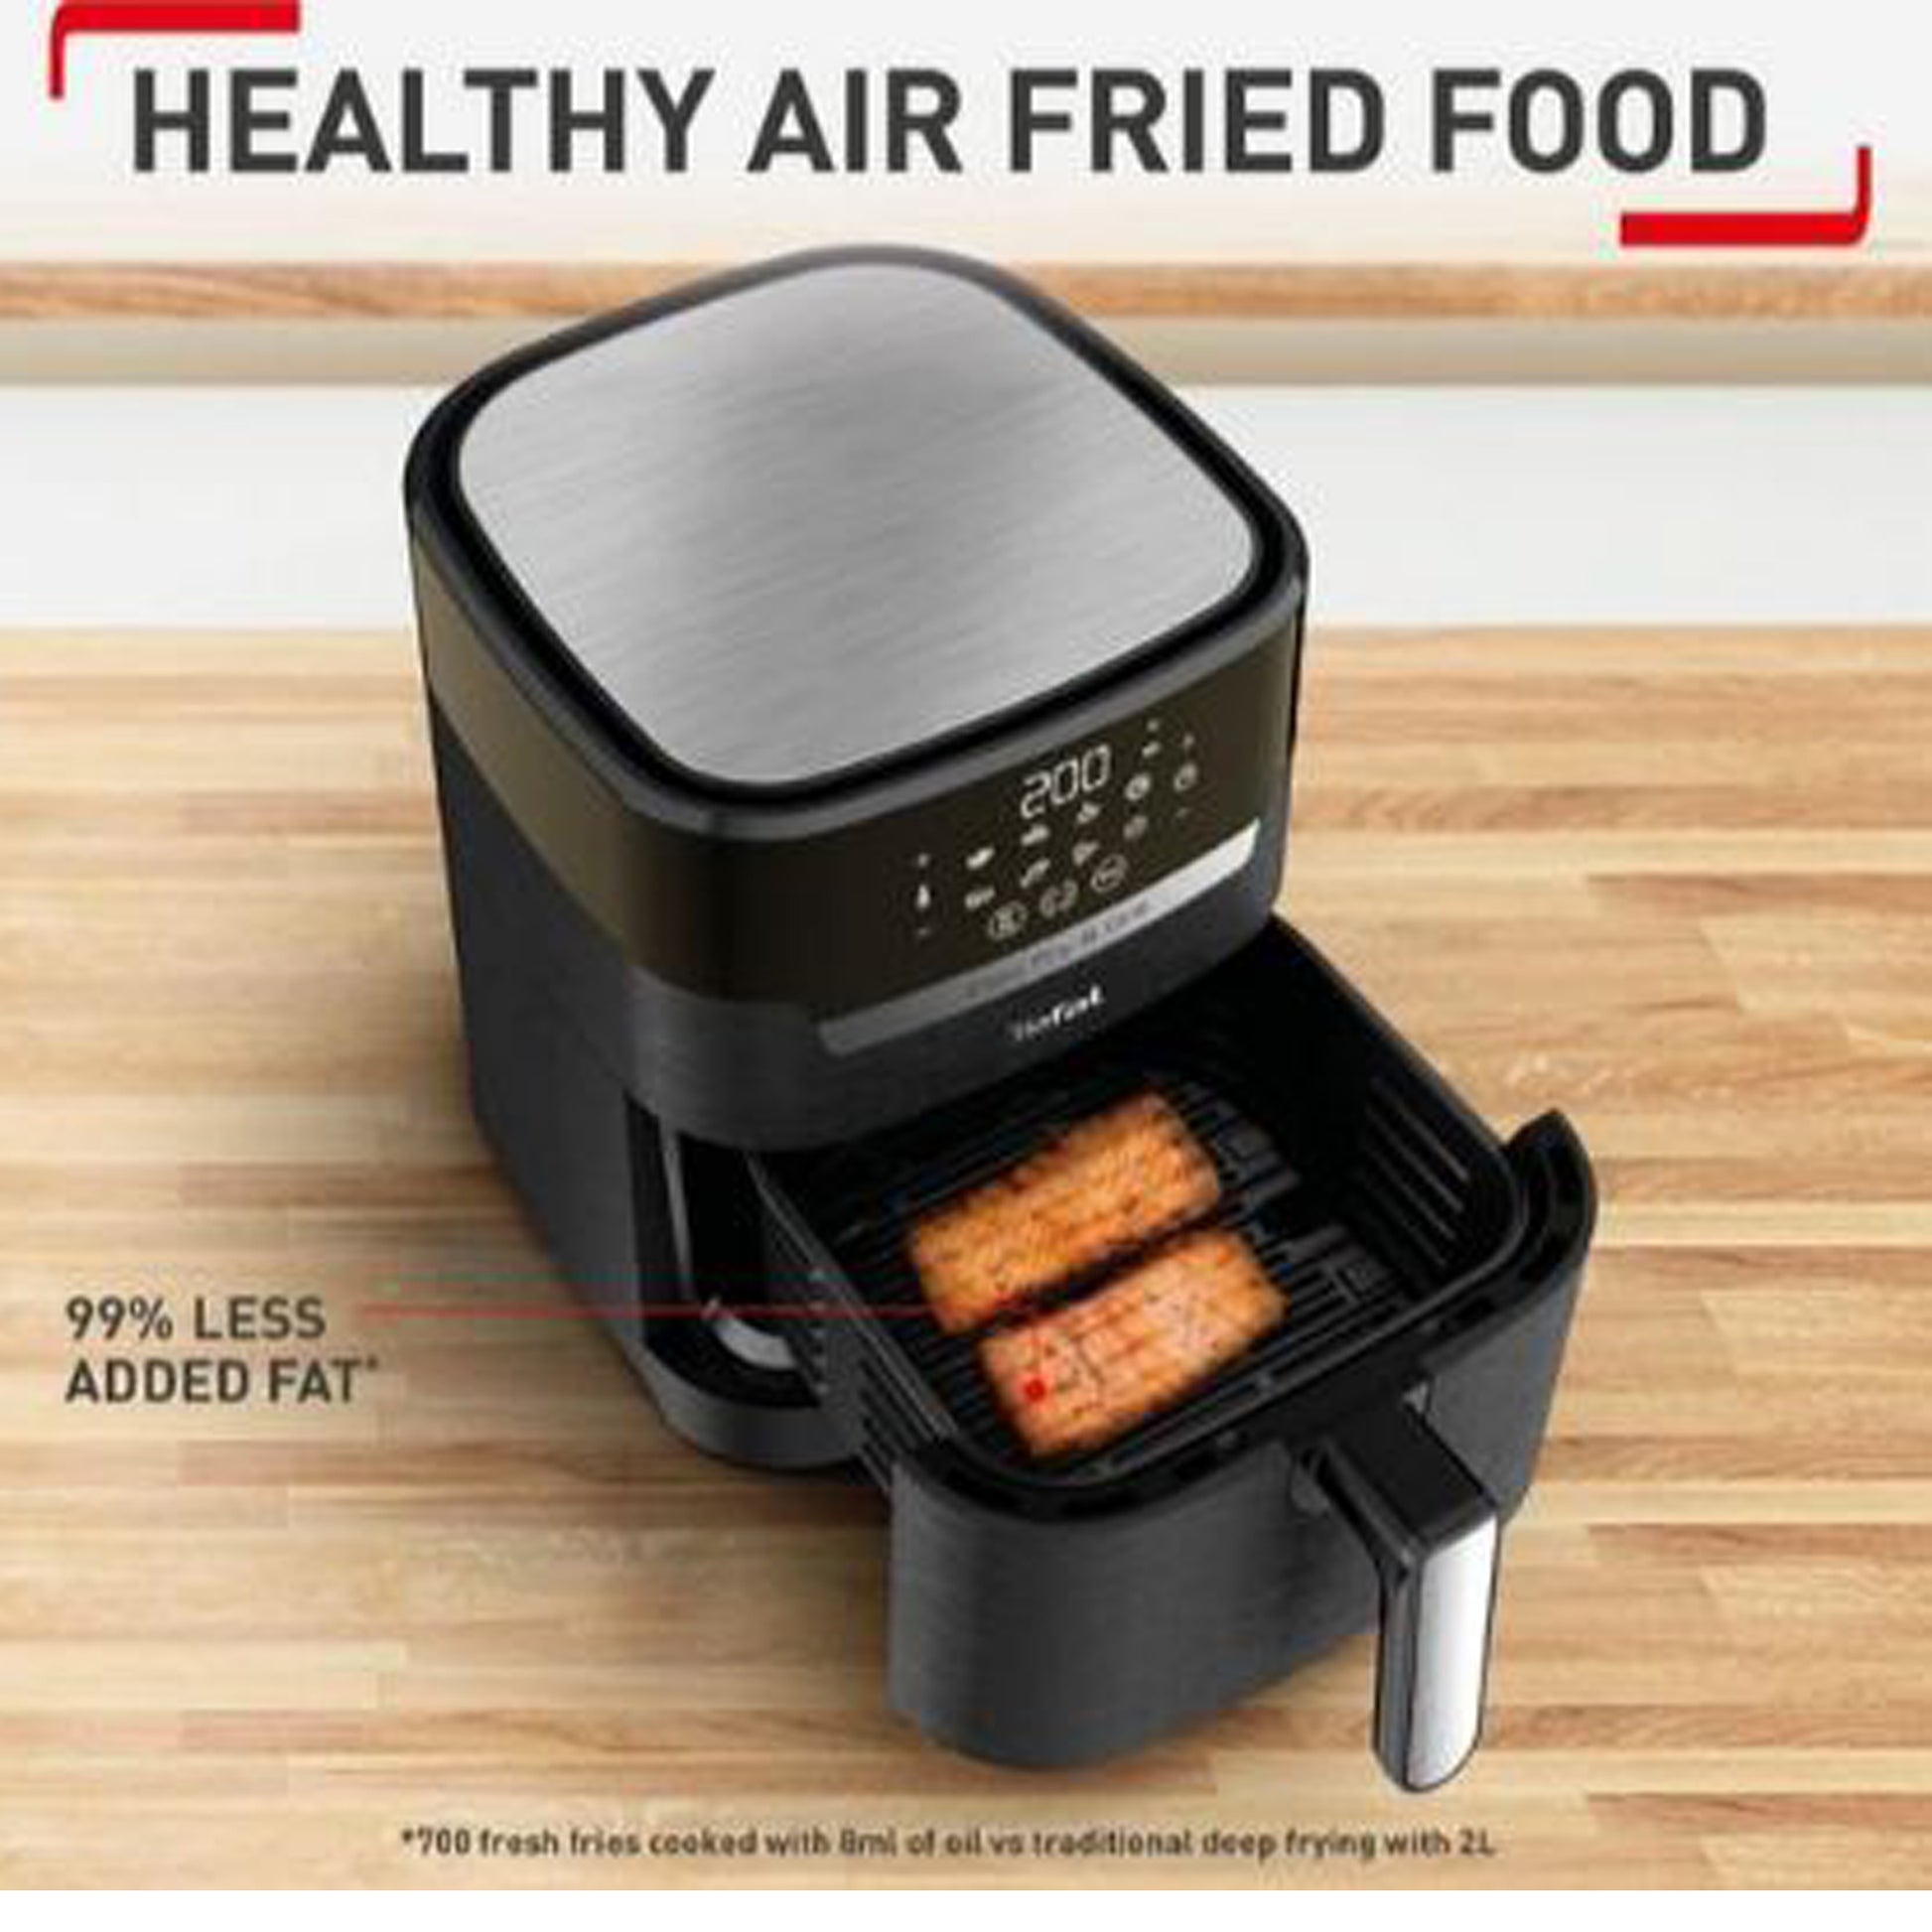 Buy Tefal EasyFry Precision 2-In-1 Air Fryer And Grill EY505827